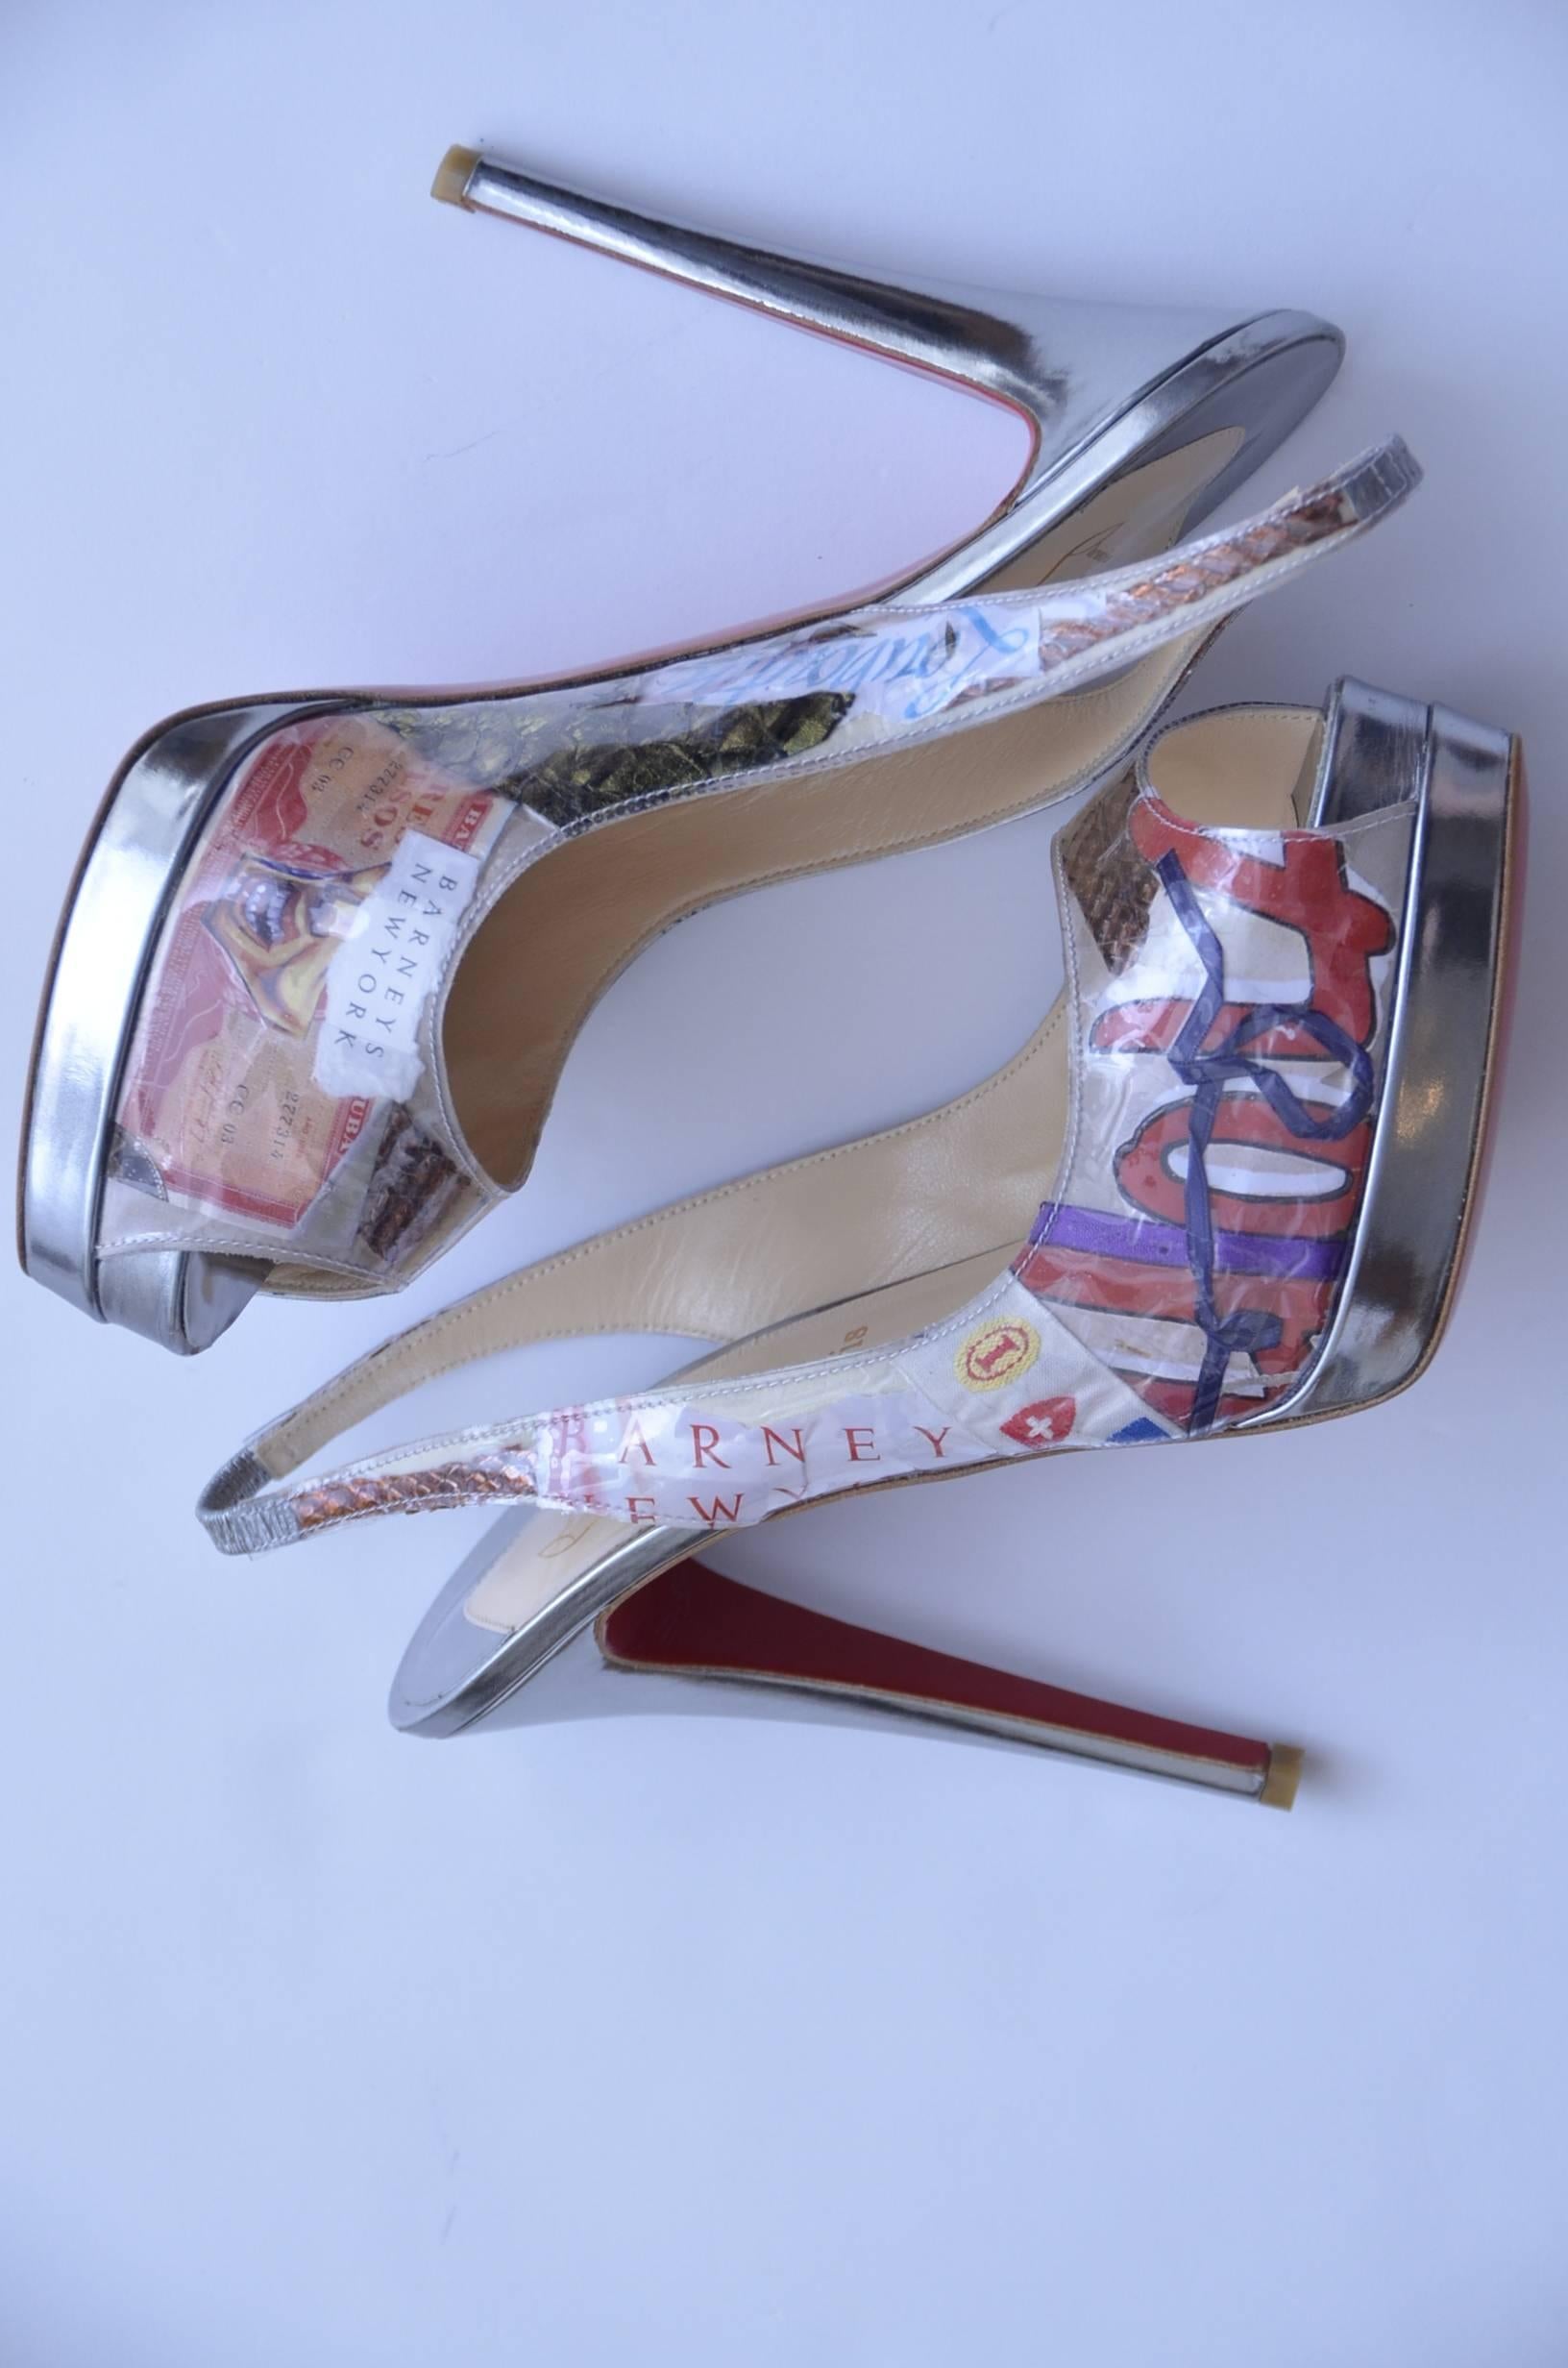 Christian Louboutin Cate Trash Heels

The neat thing about the louboutin Cate trash heels is that no two pairs are identical and they are all individually unique. Each shoe is  unique and made of 